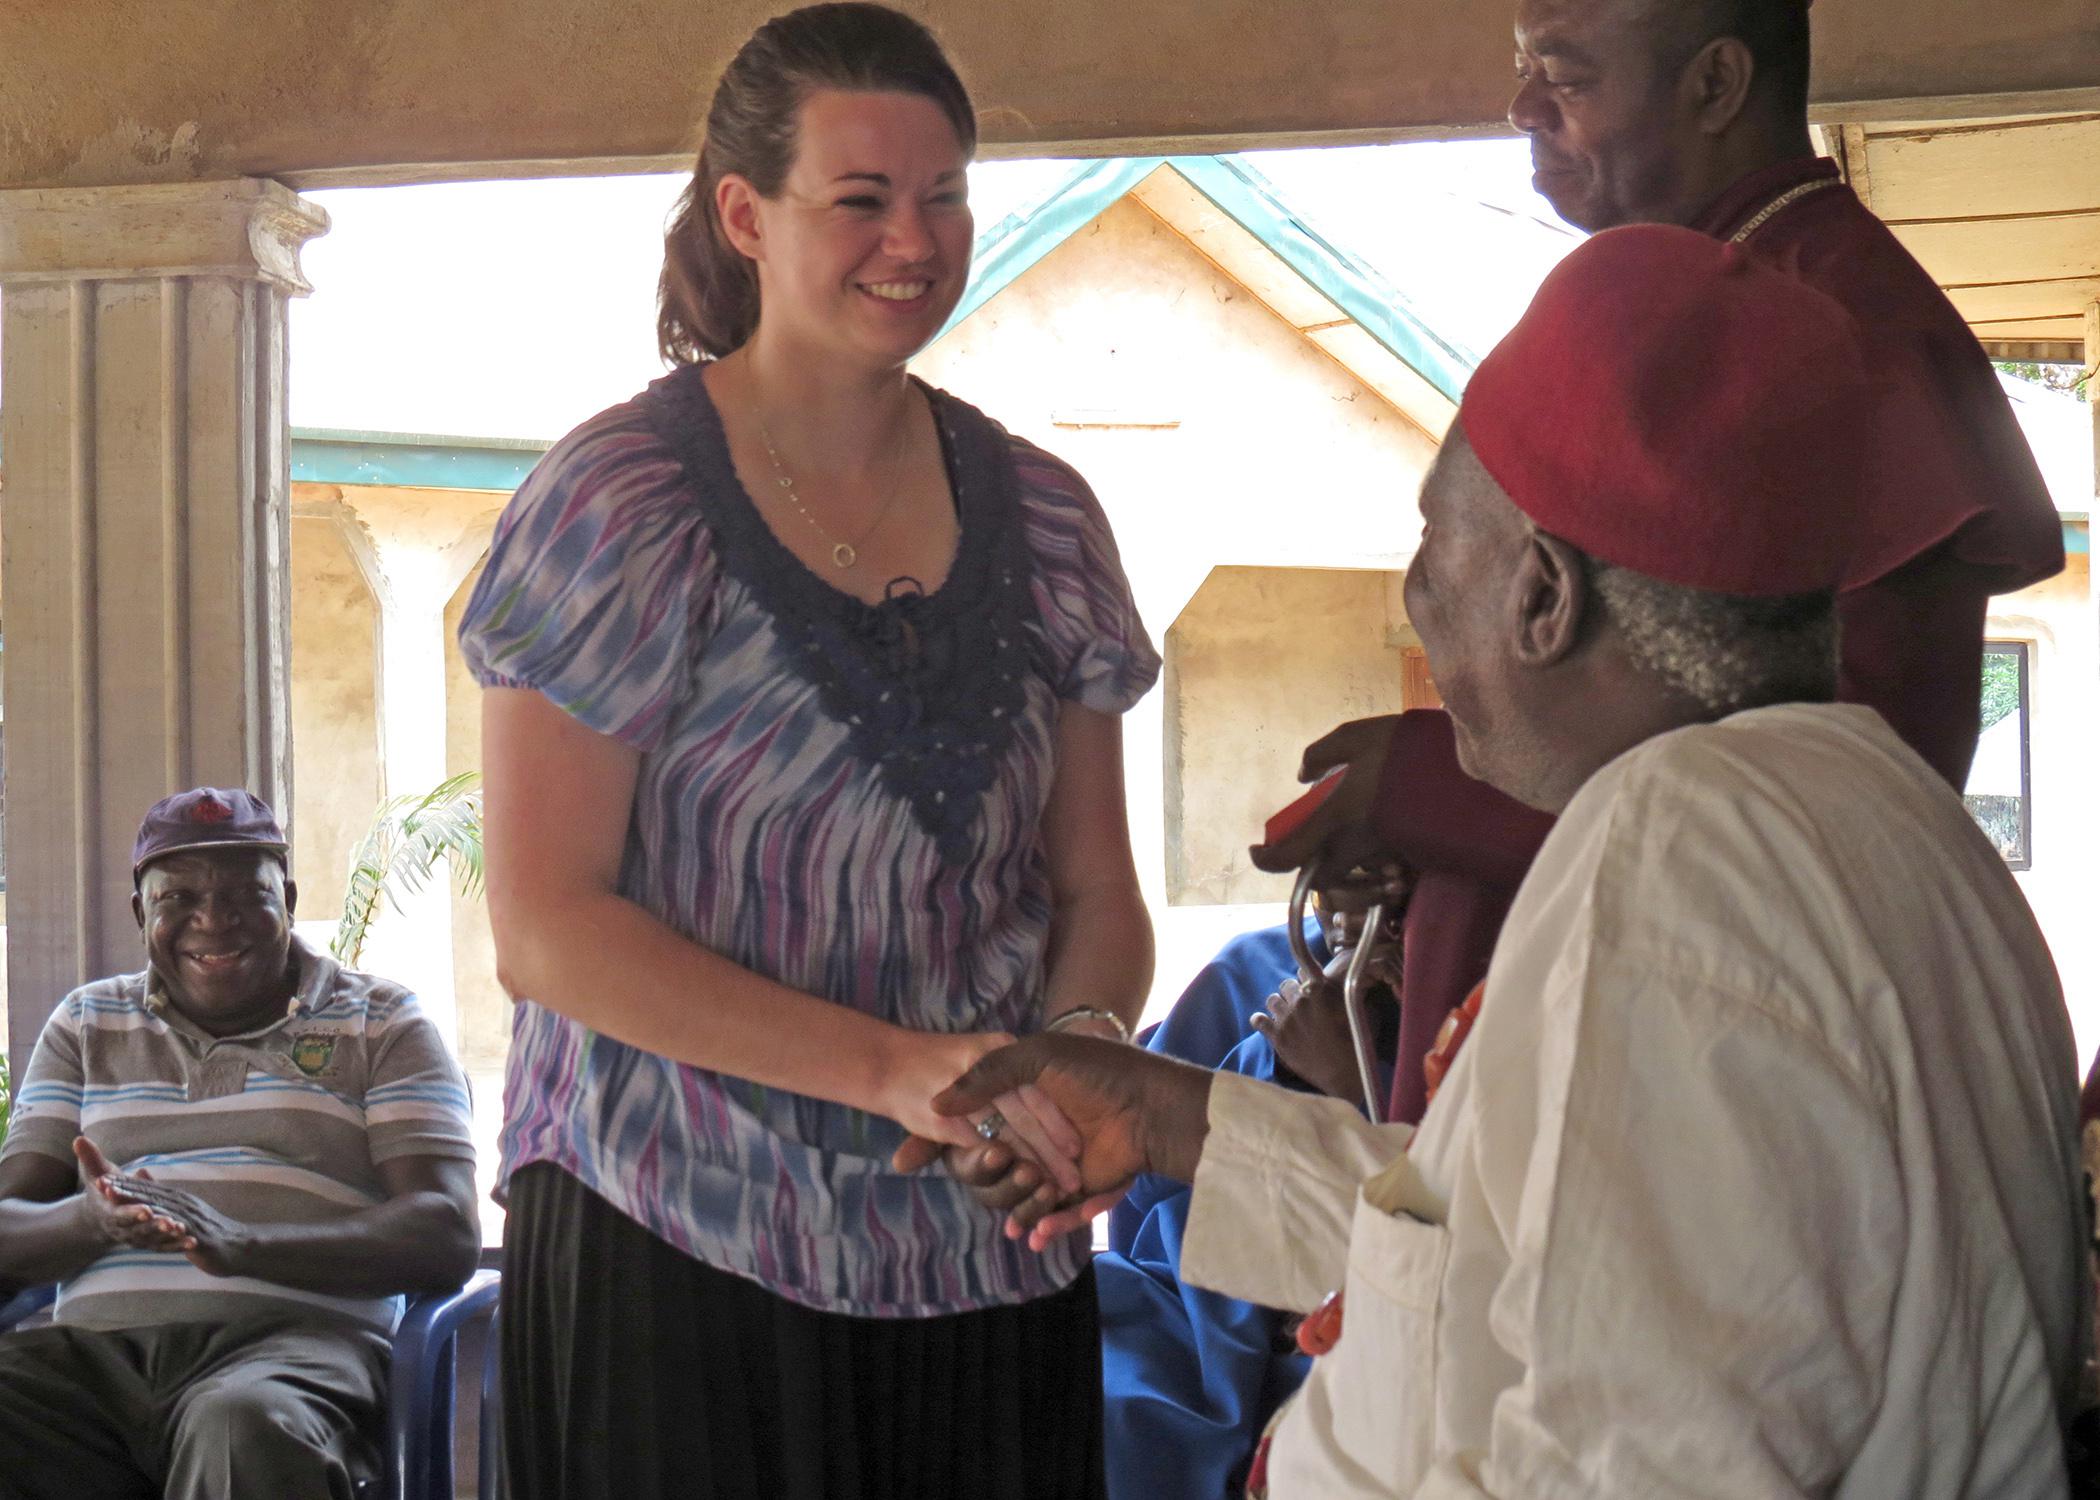 Alyssa Barrett, a senior agricultural science major at Mississippi State University, spent spring break in Nigeria teaching agriculture using Extension Service techniques. (Submitted photo/Susan Seal)